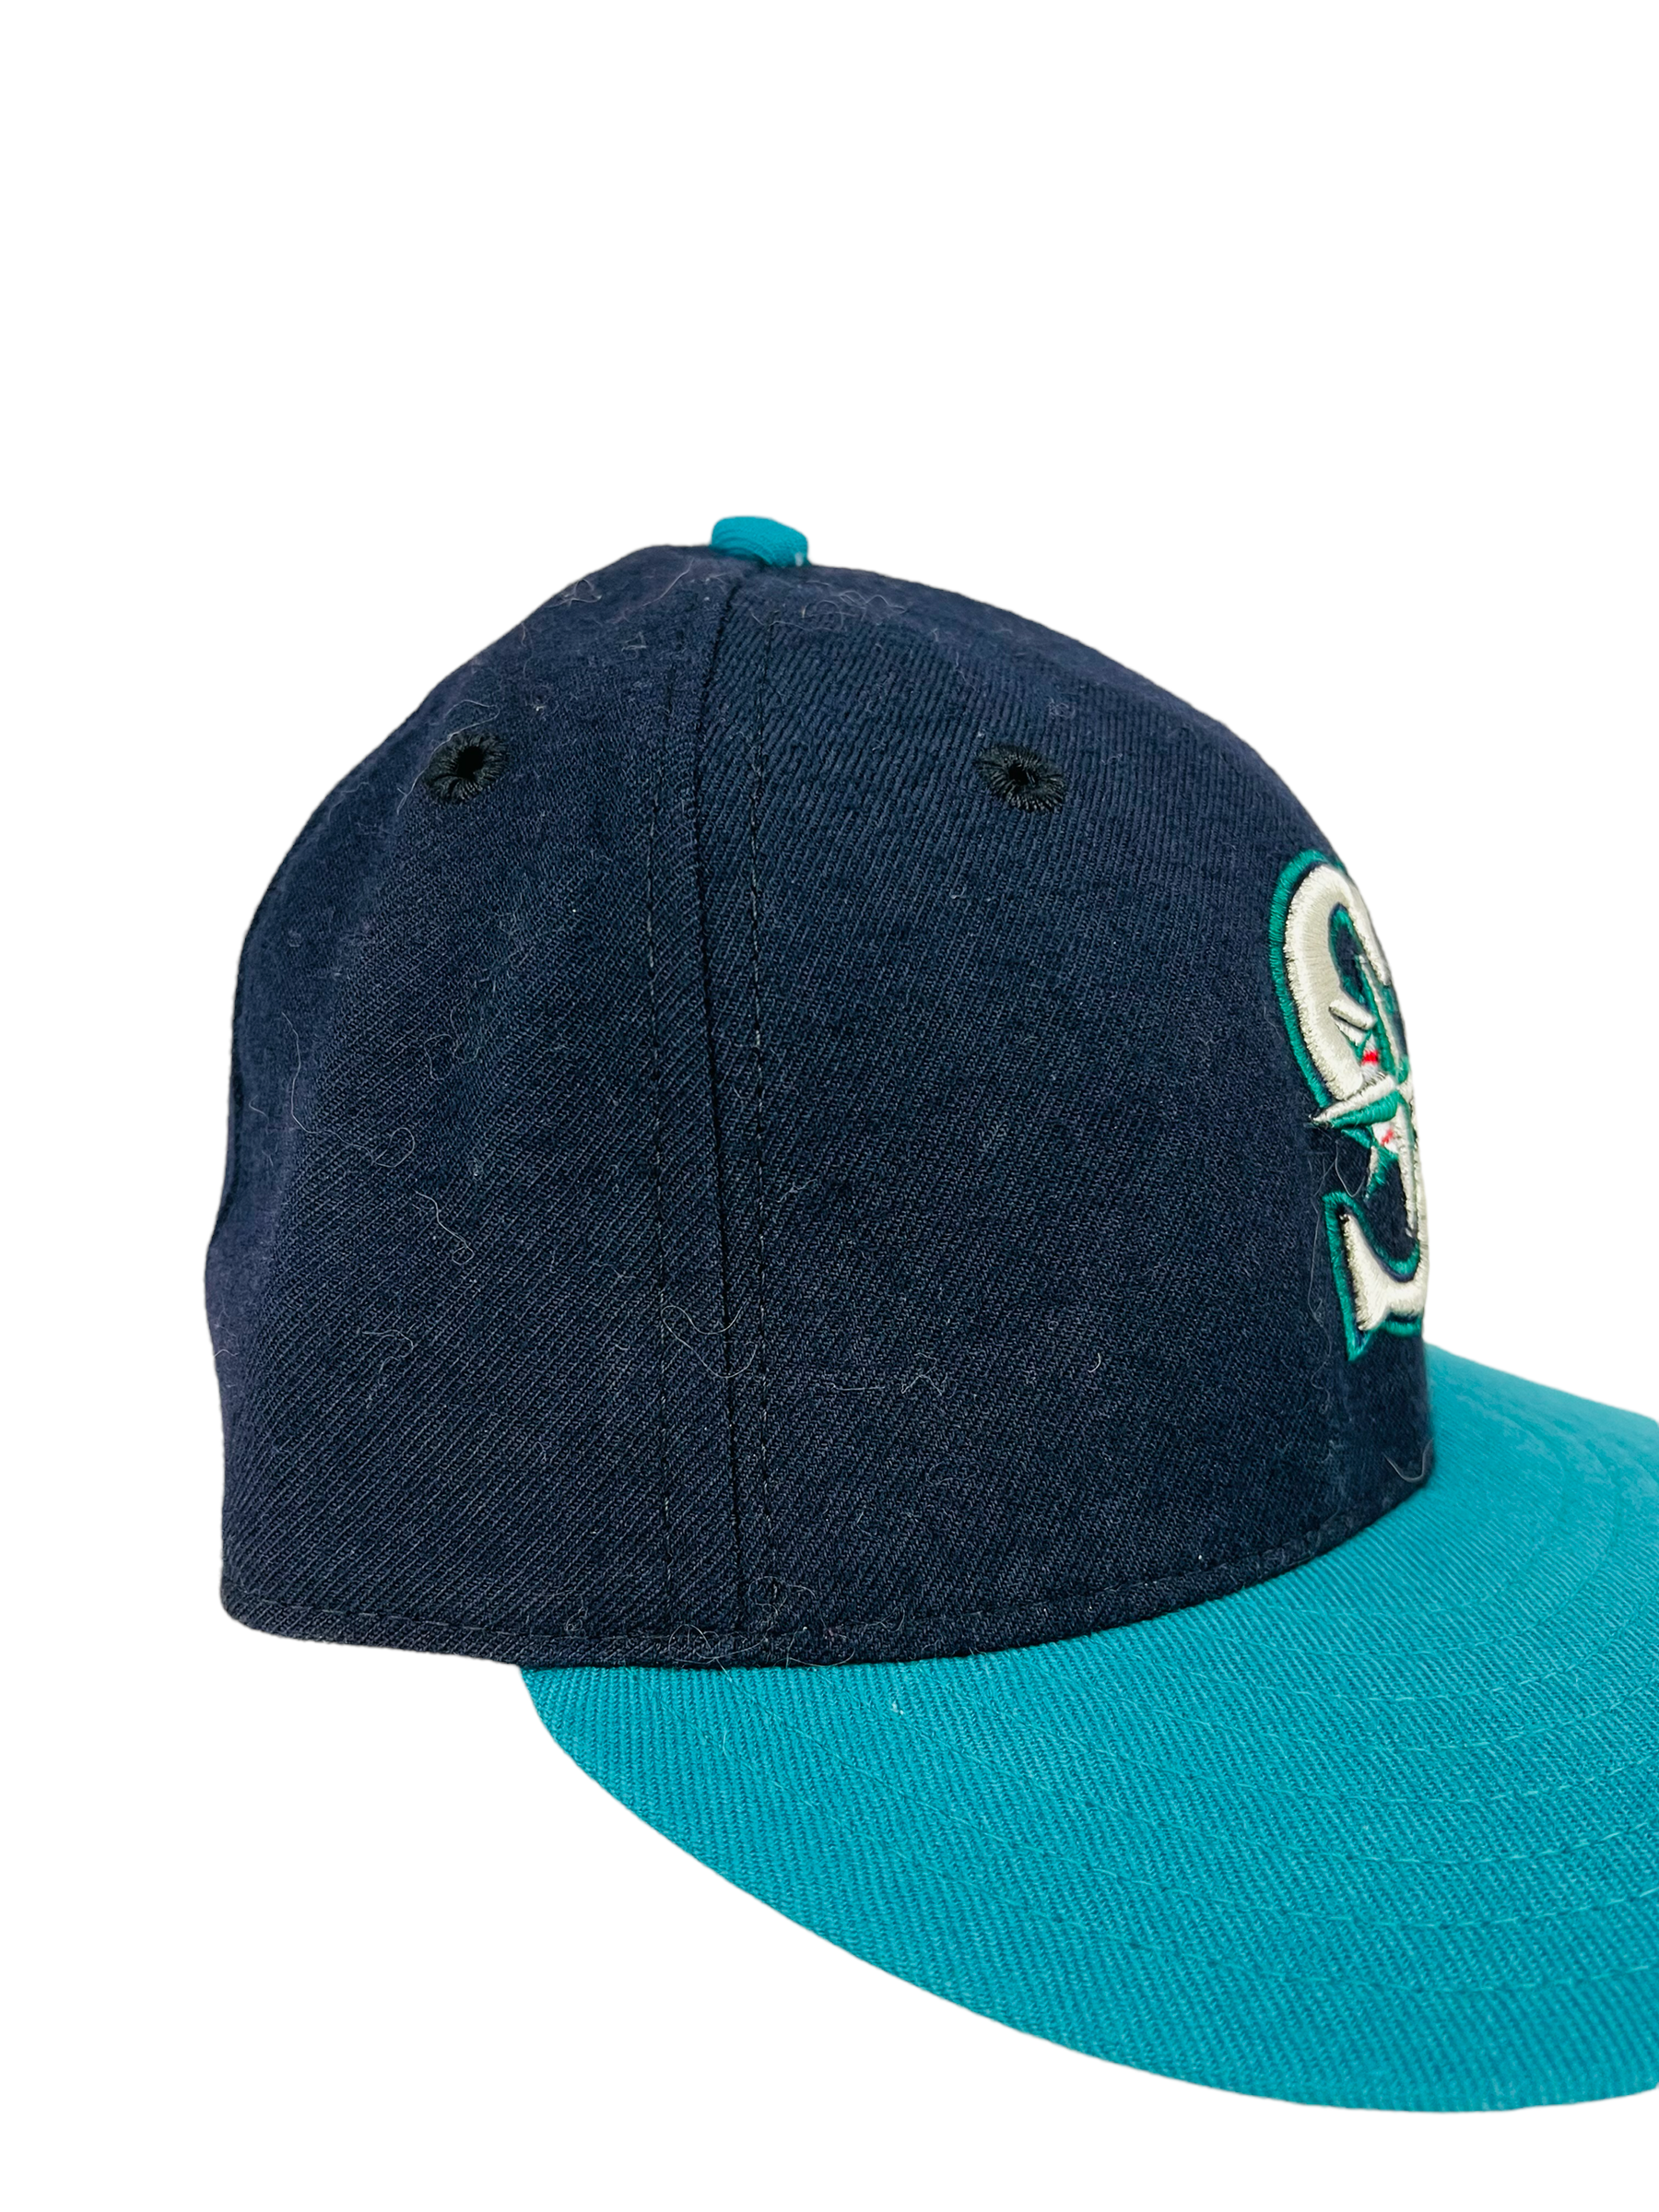 Vintage 90s Seattle Mariners New Era 59Fifty Pro Model Hat Cap Fitted 7 5/8